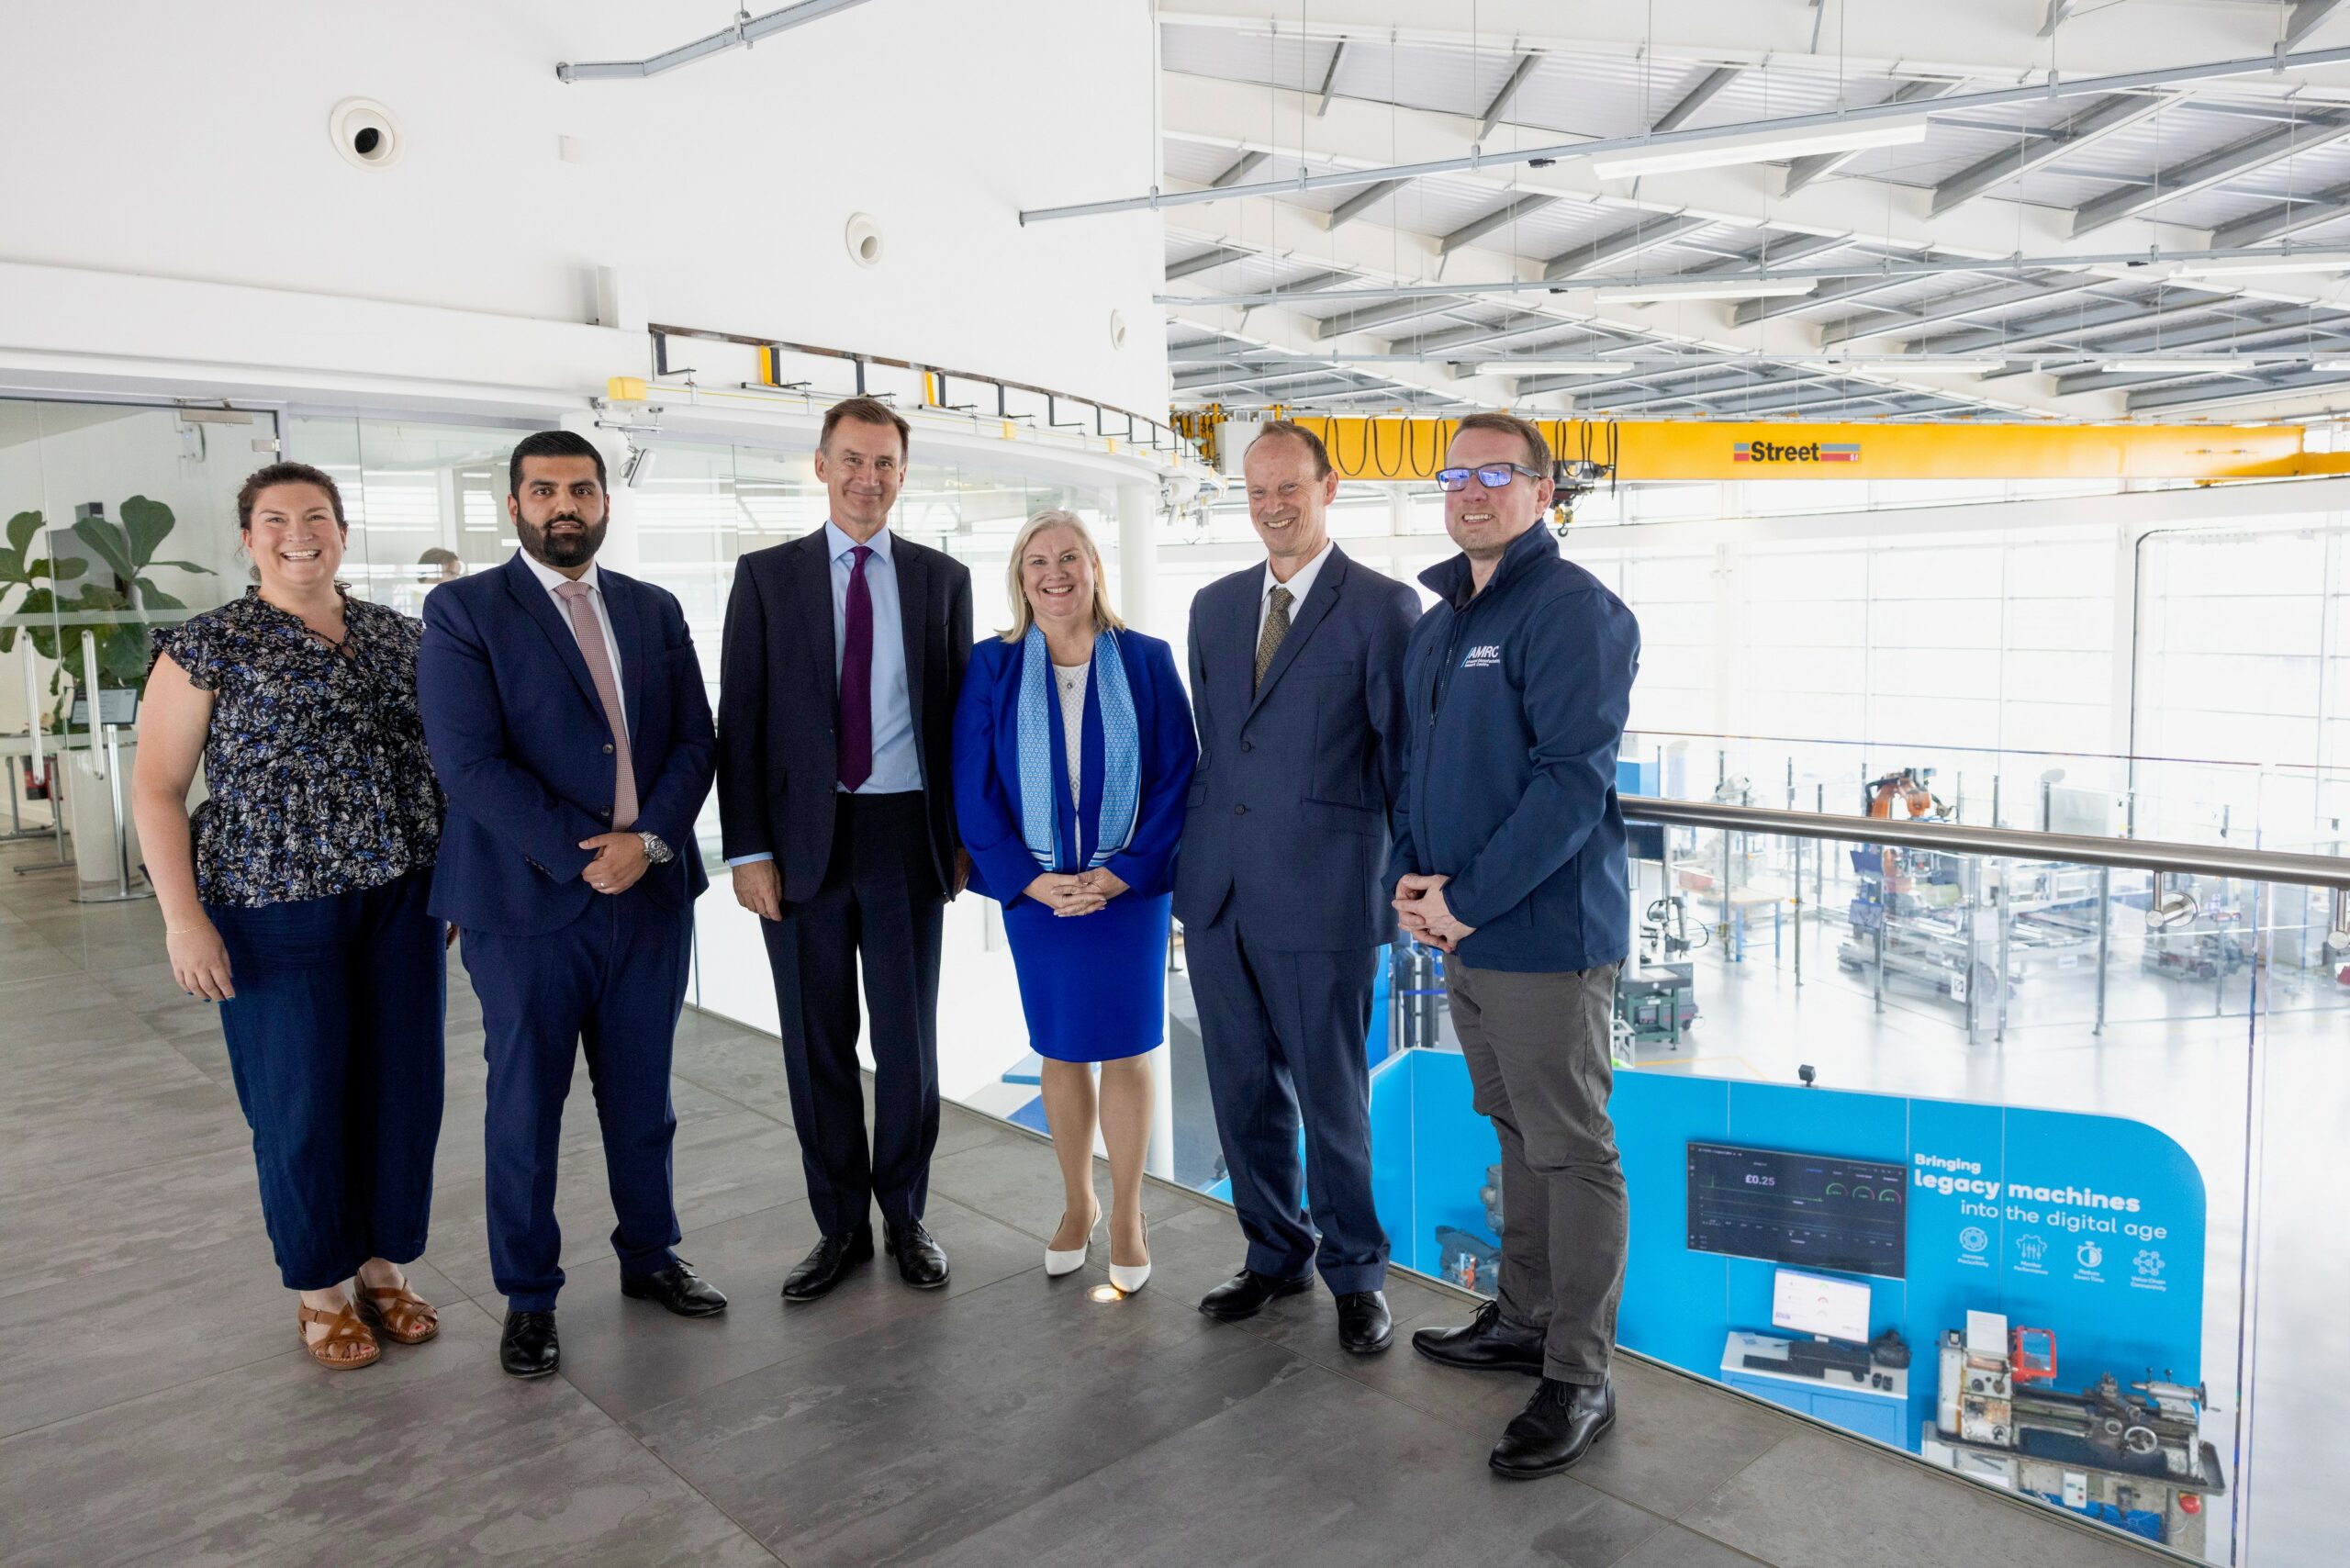 ATI Chief Relationships Officer Sophie Lane, UK Chancellor and delegates from AMRC and Boeing